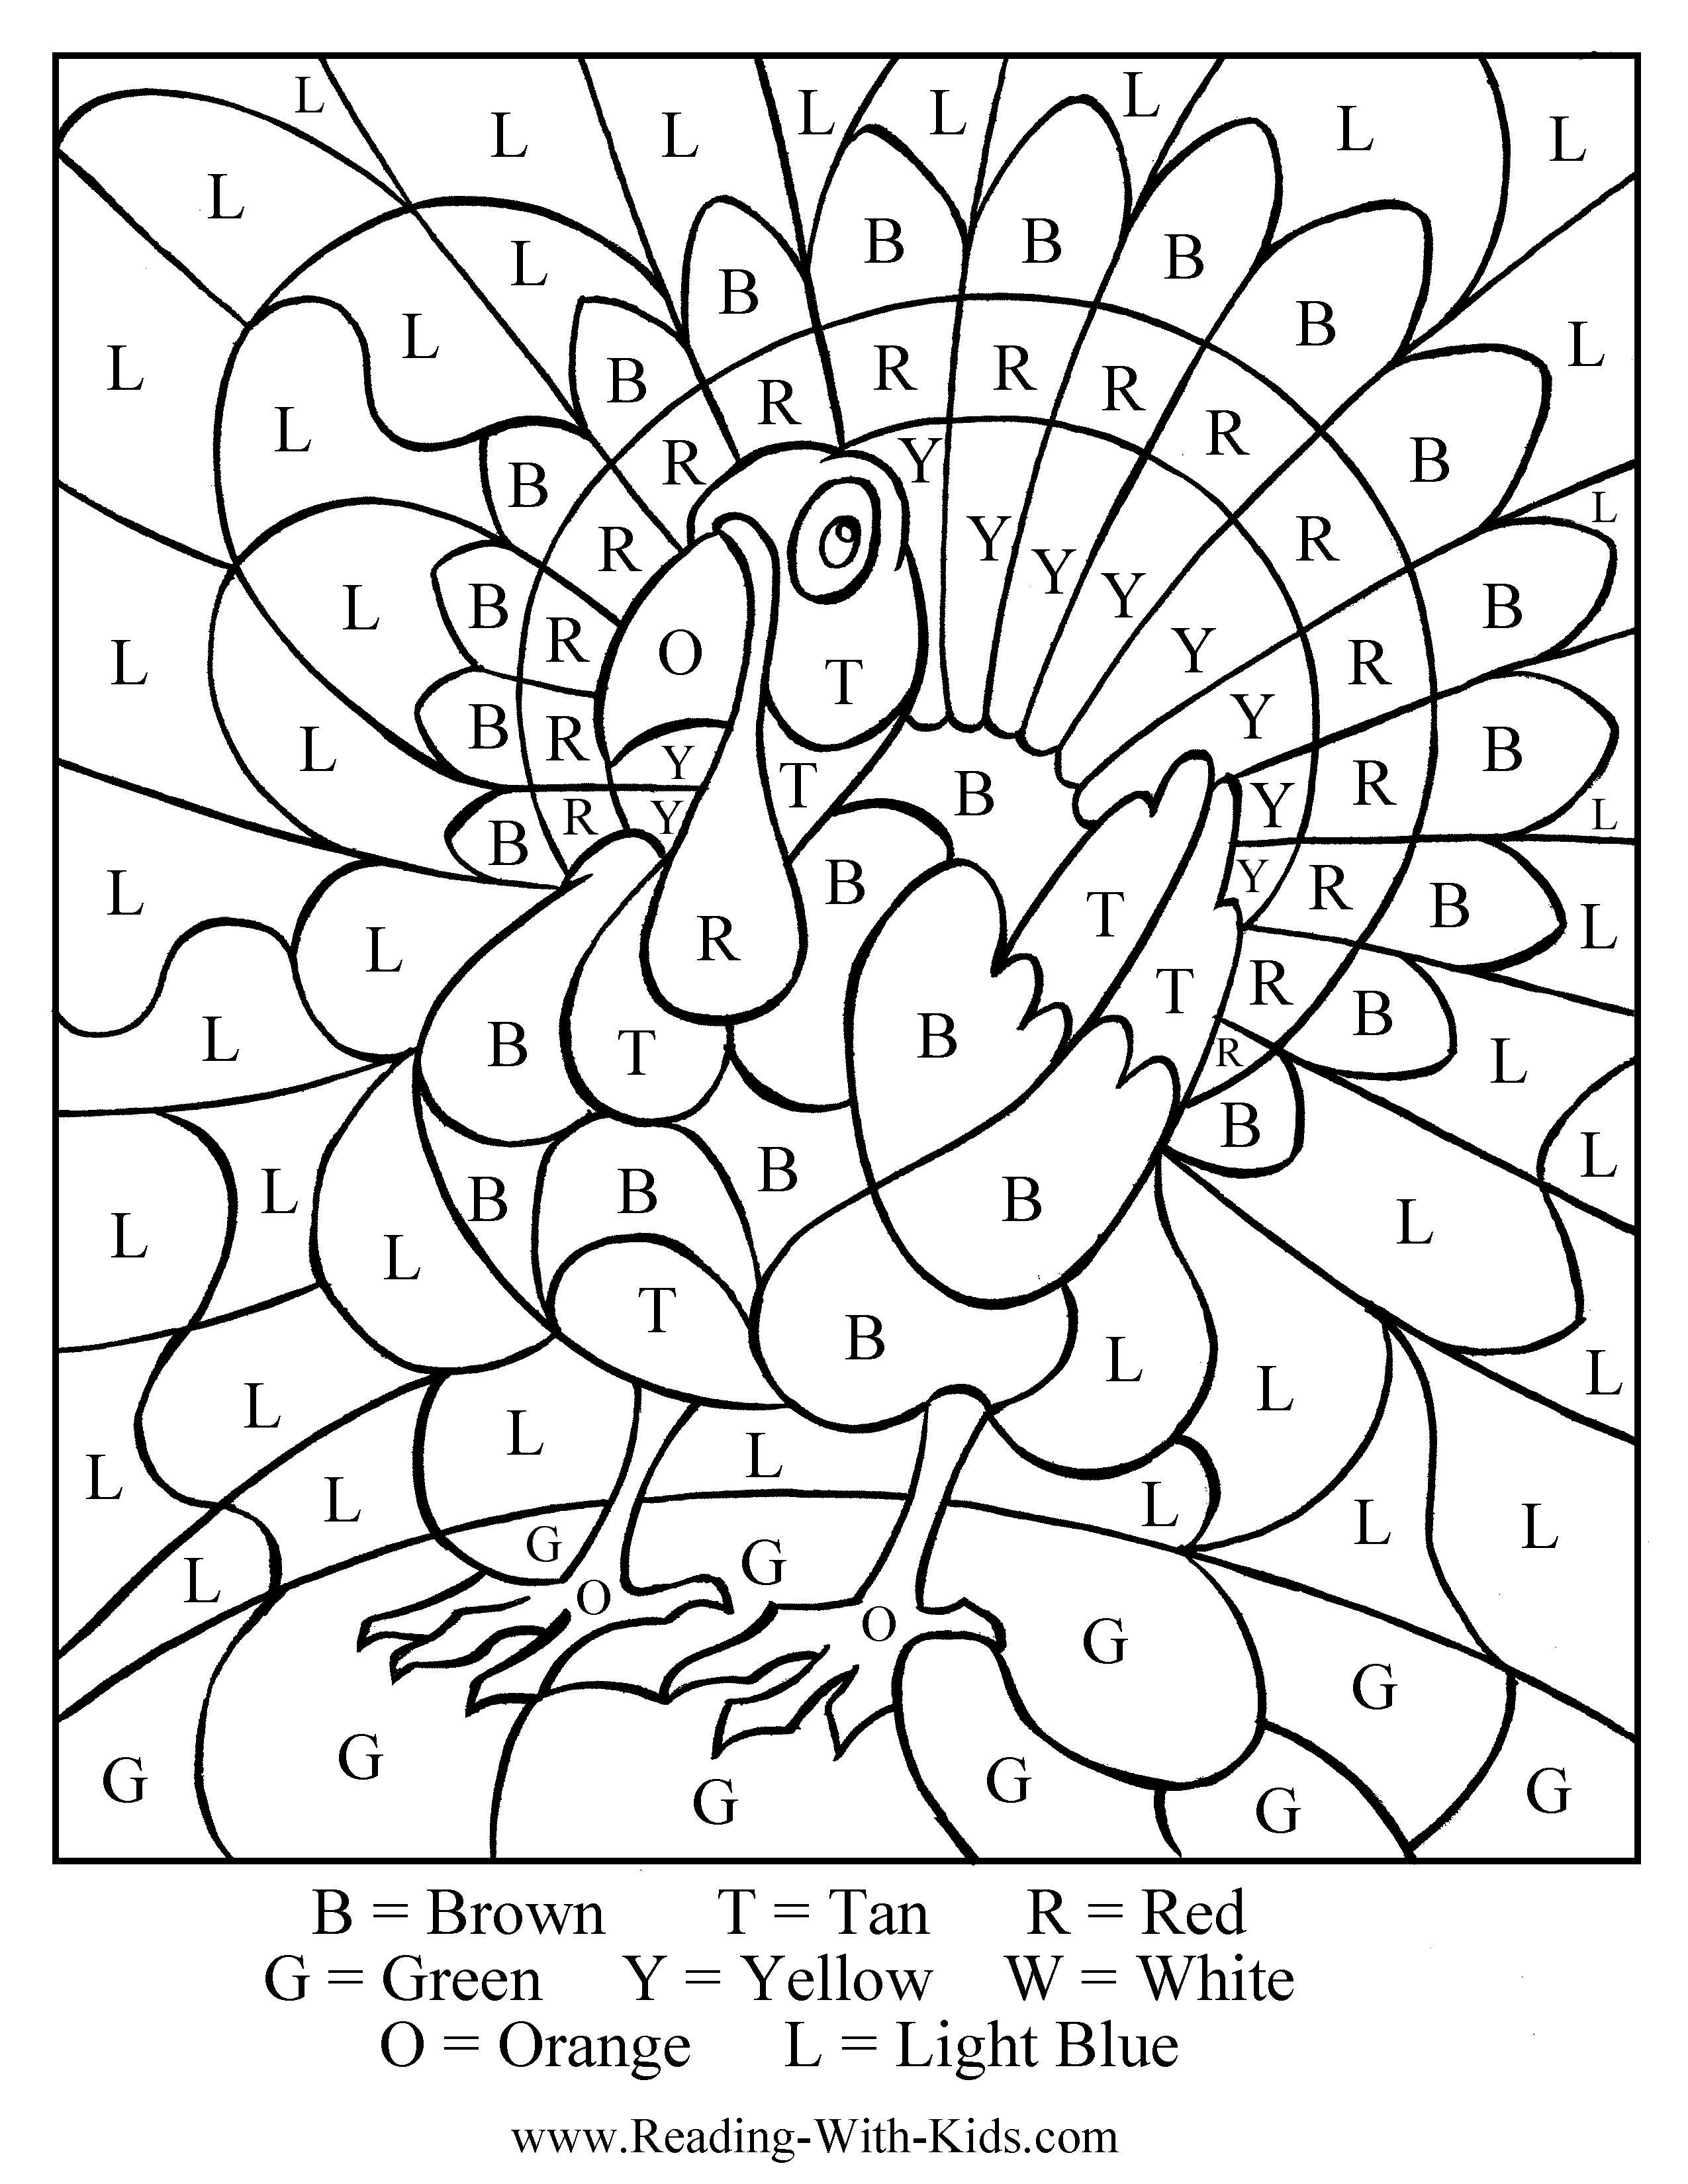 Ooodles Of Thanksgiving Printables, Puzzles, Games For Kids - Free Printable Thanksgiving Coloring Pages